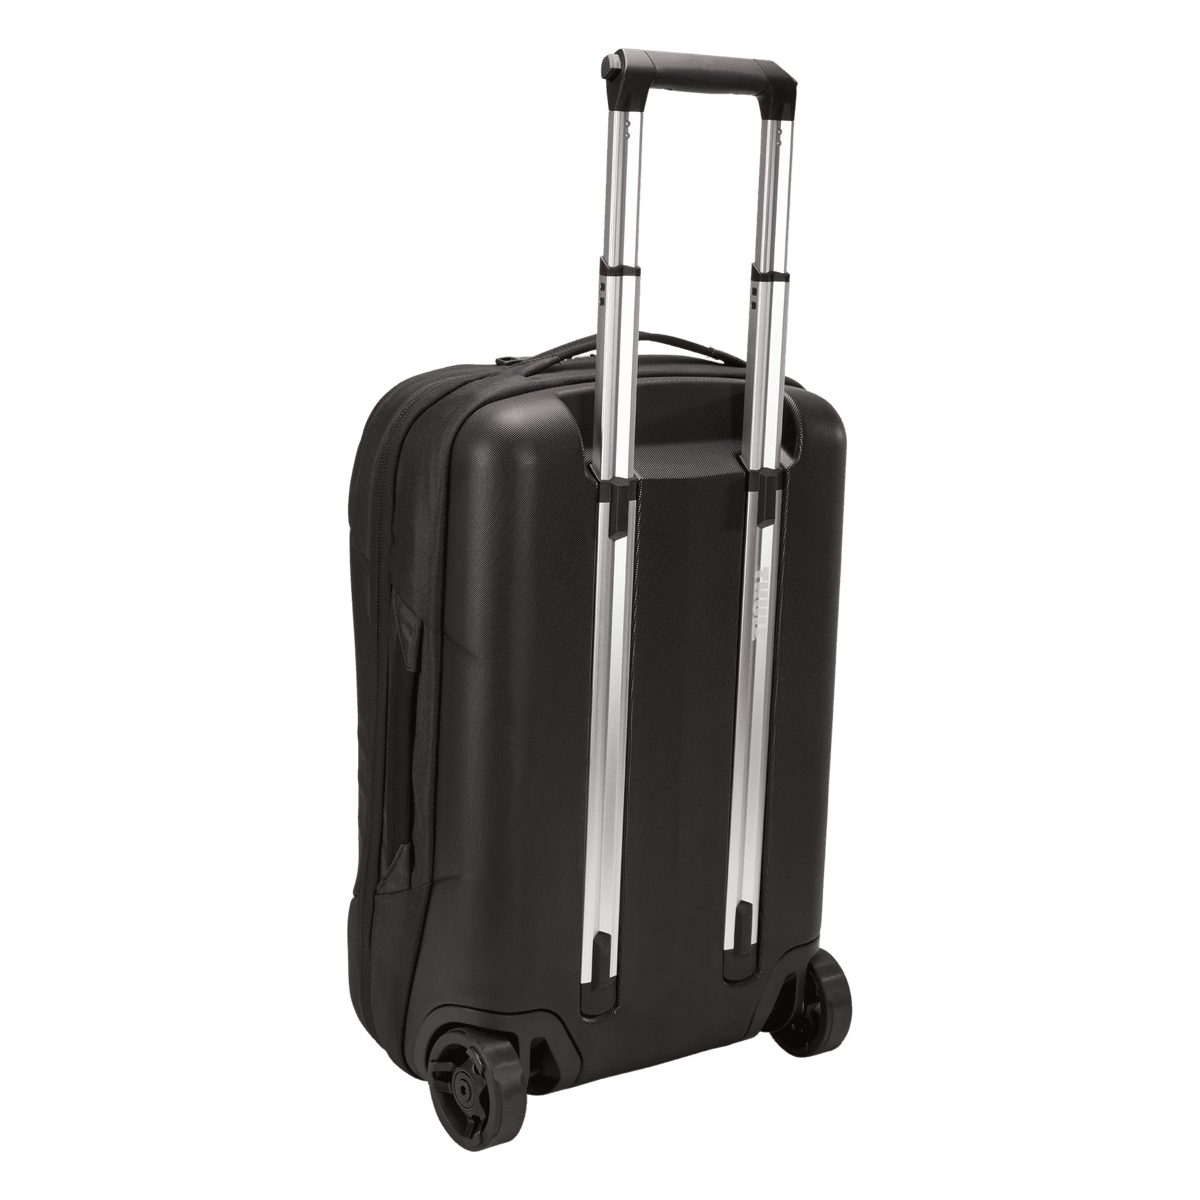 Thule Subterra carry on luggage black